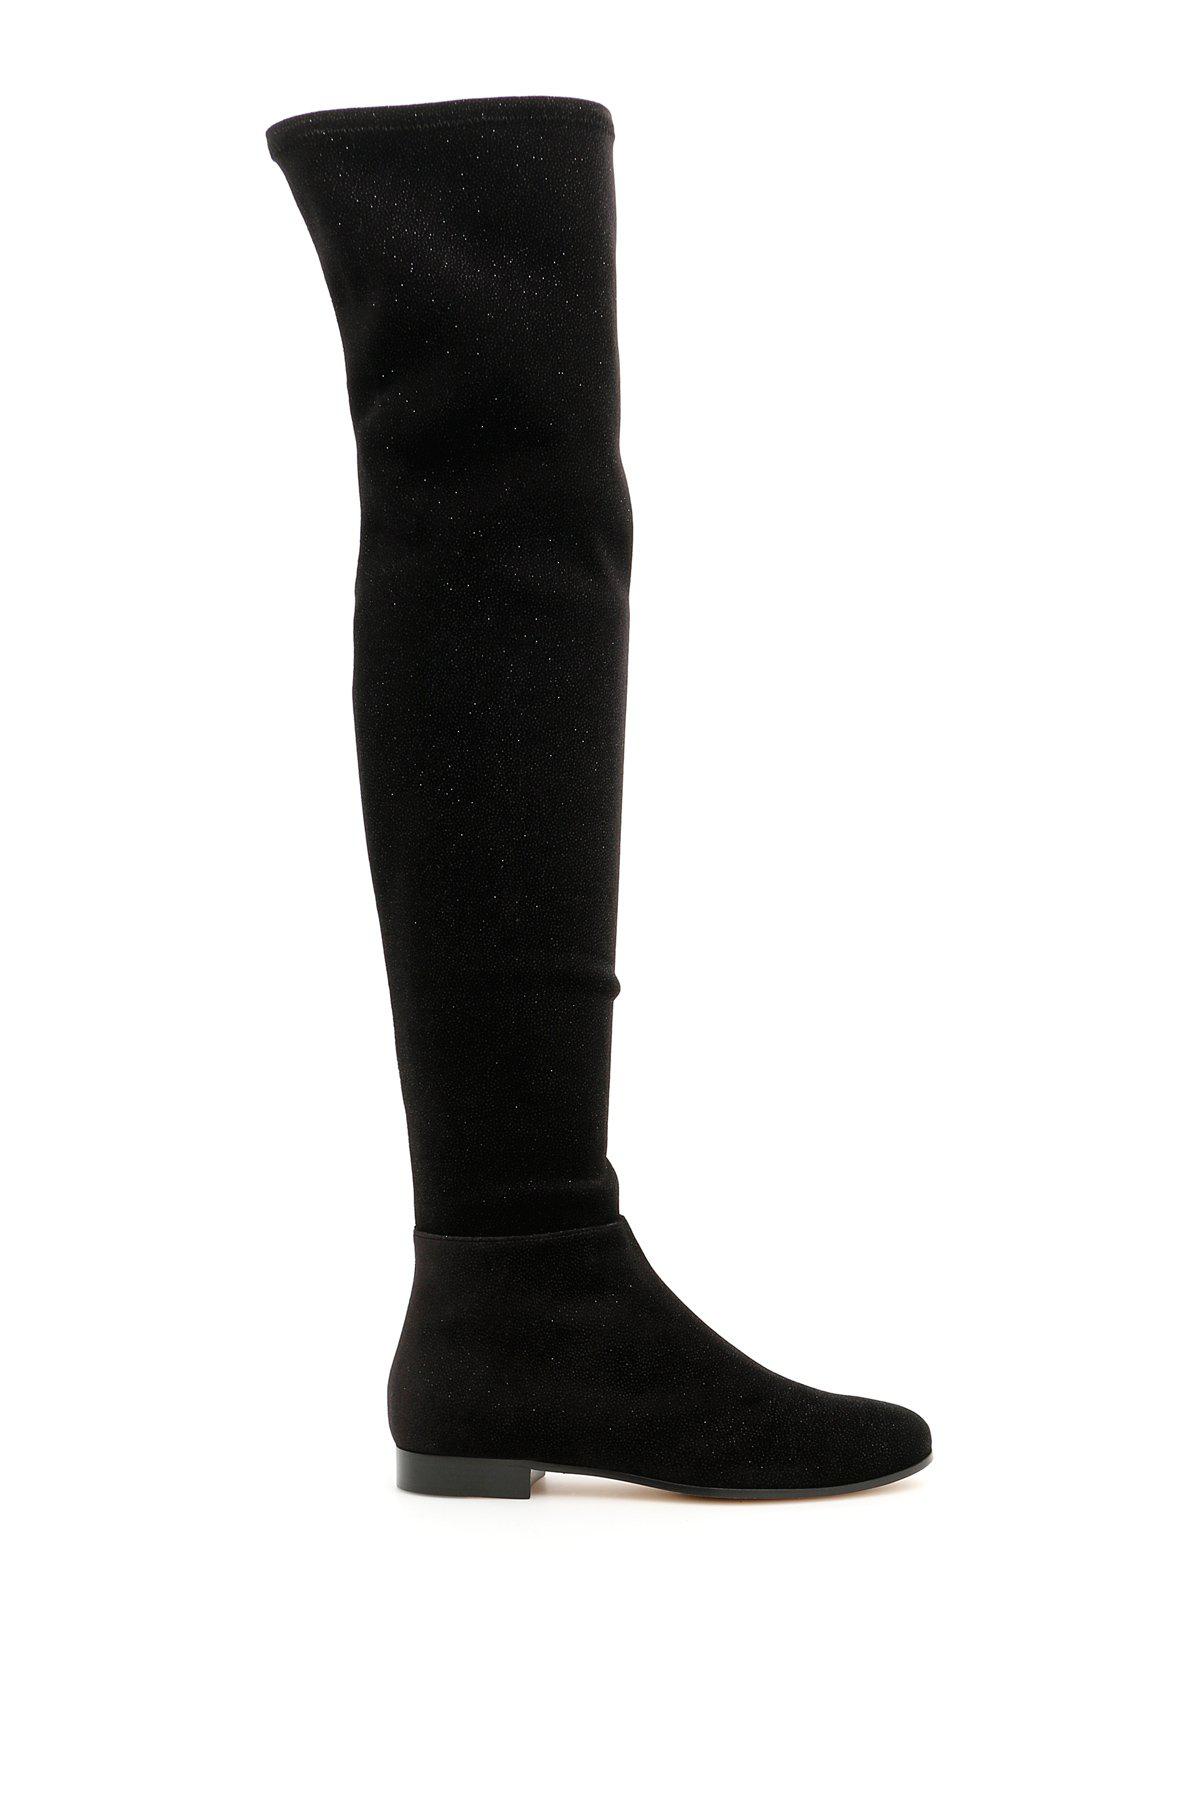 jimmy choo suede knee high boots